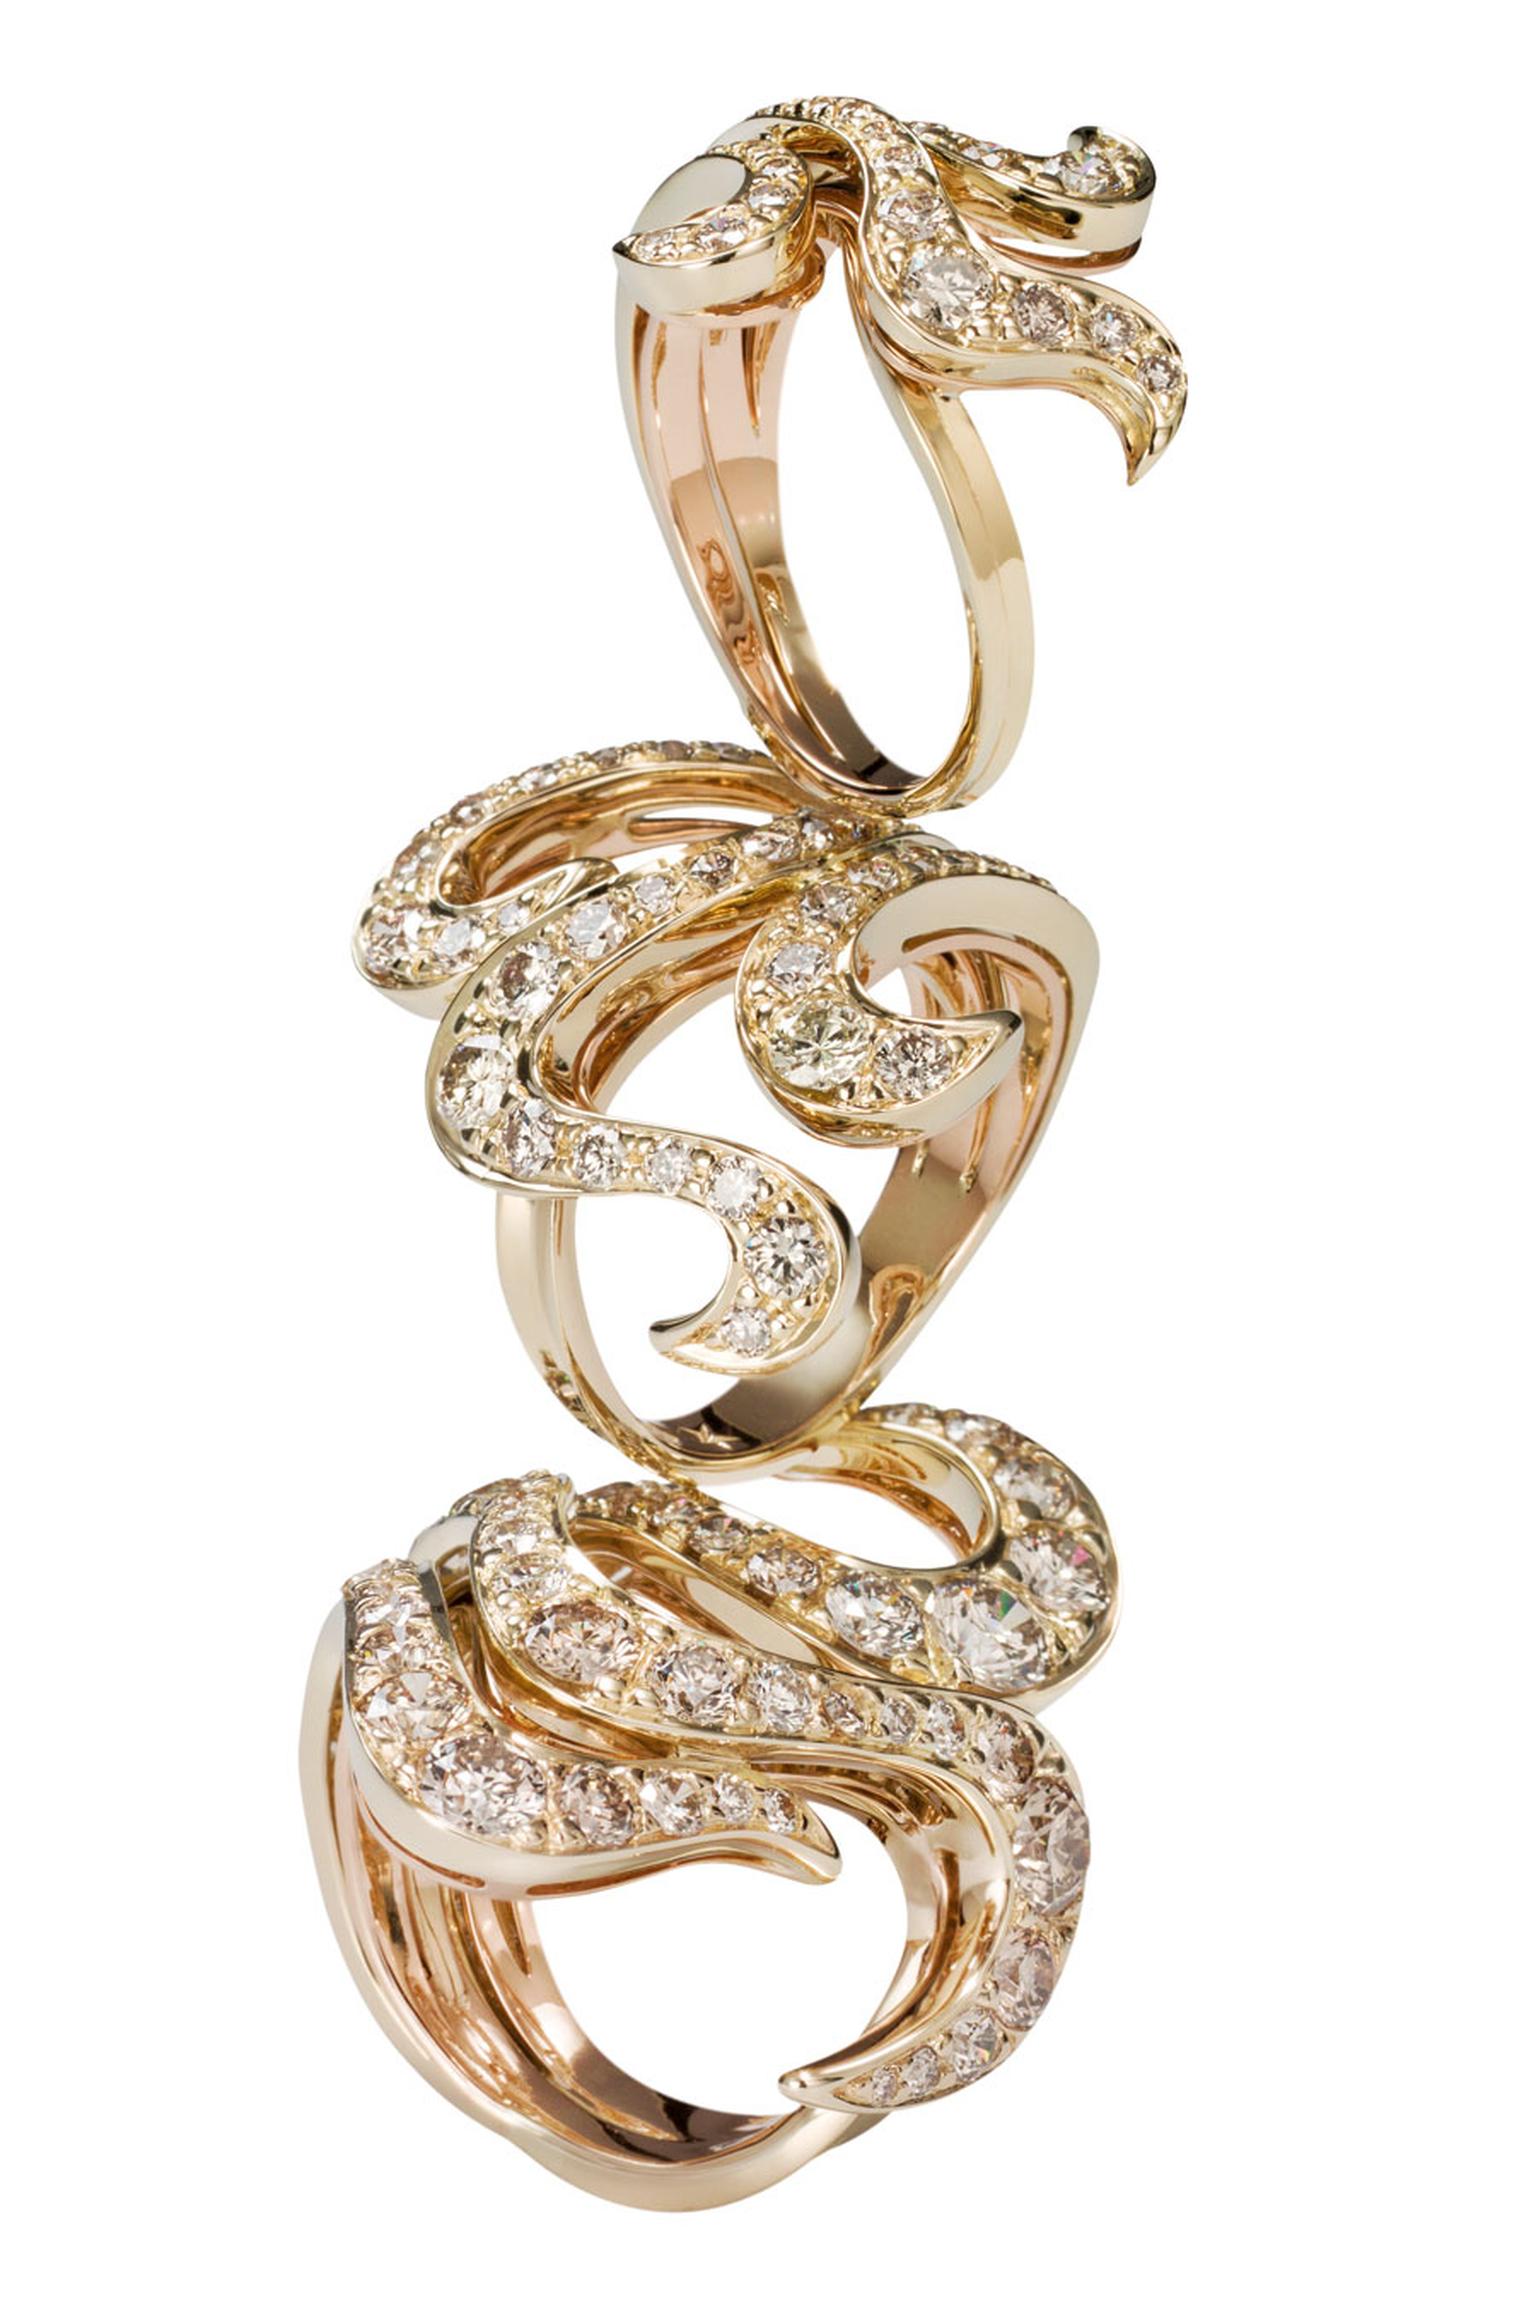 H-Stern-Rings-in-yellow-and-rose-gold-with-diamonds